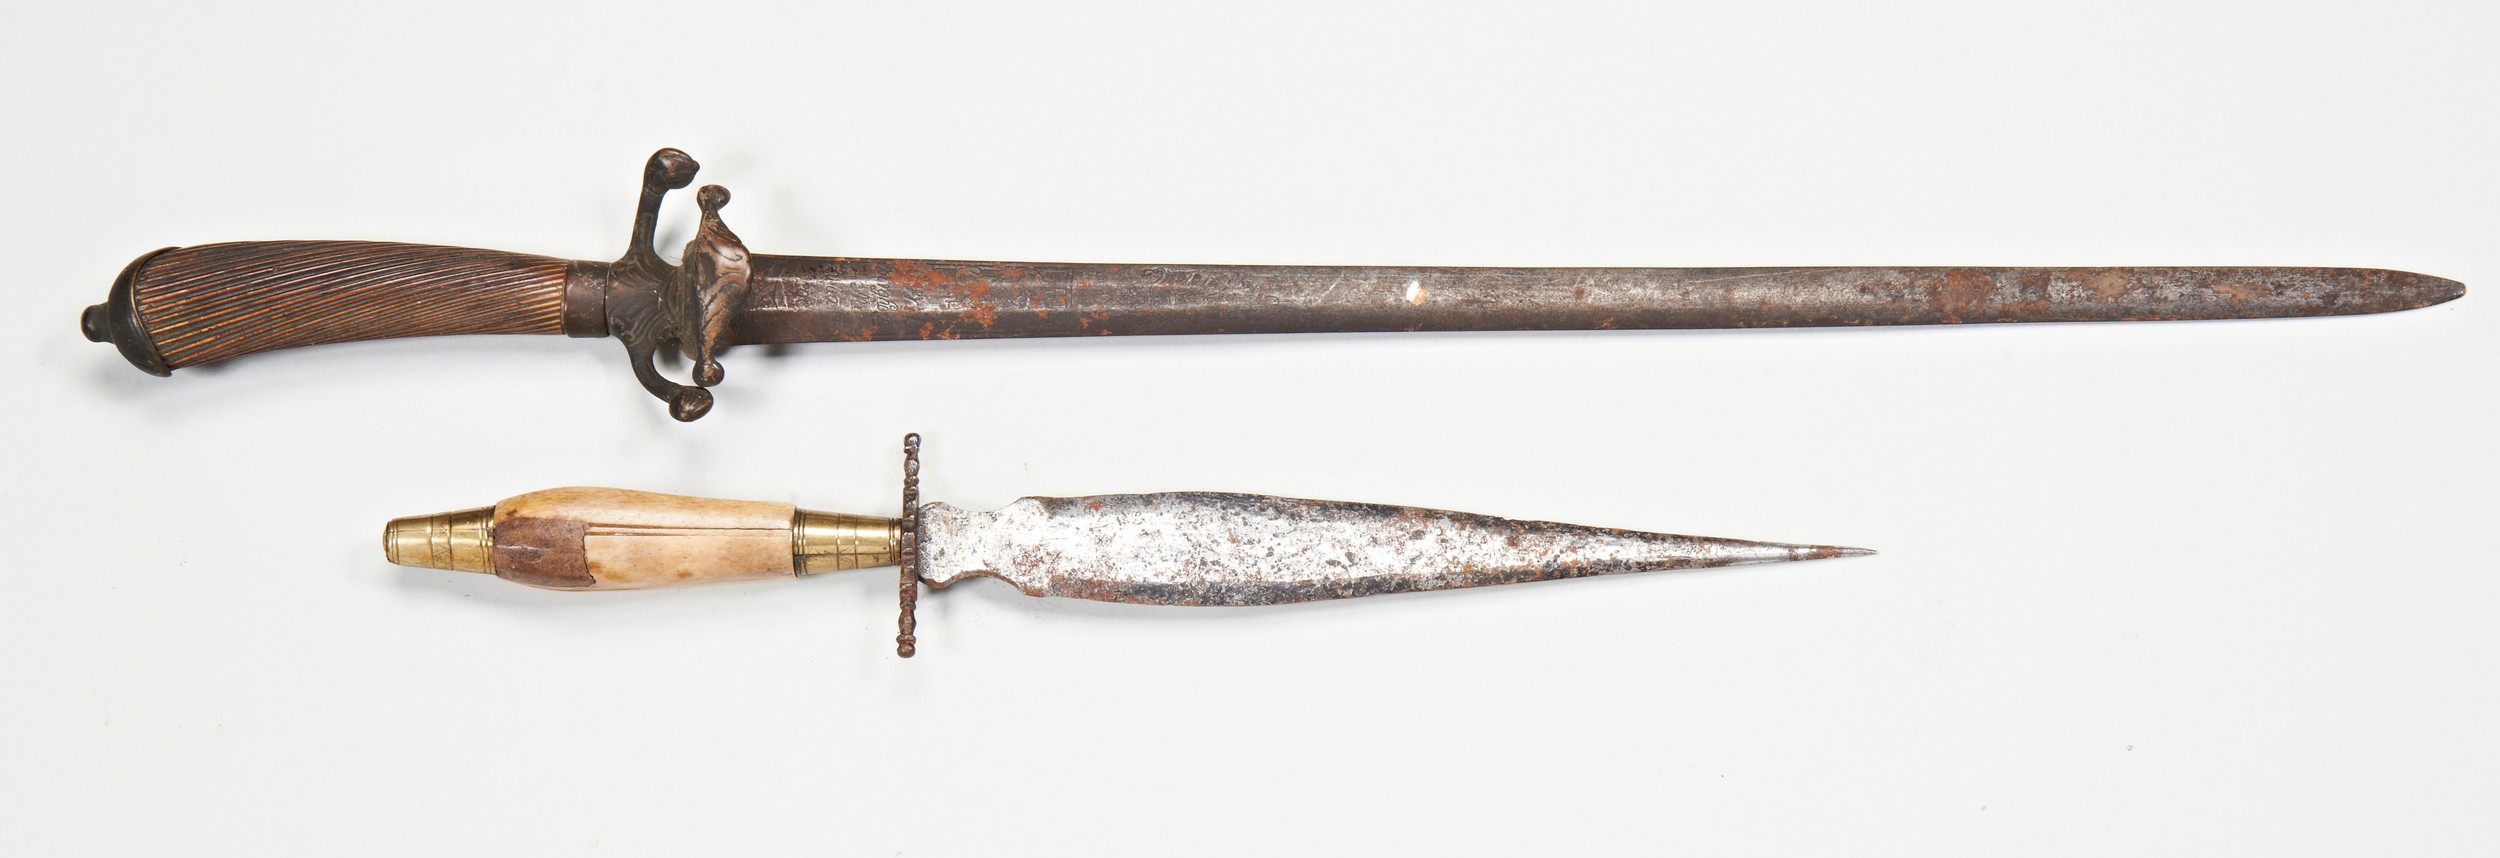 AN 18/19TH CENTURY SHORT CONTINENTAL HUNTING SWORD the etched blade with ‘motto’ and bone handle and